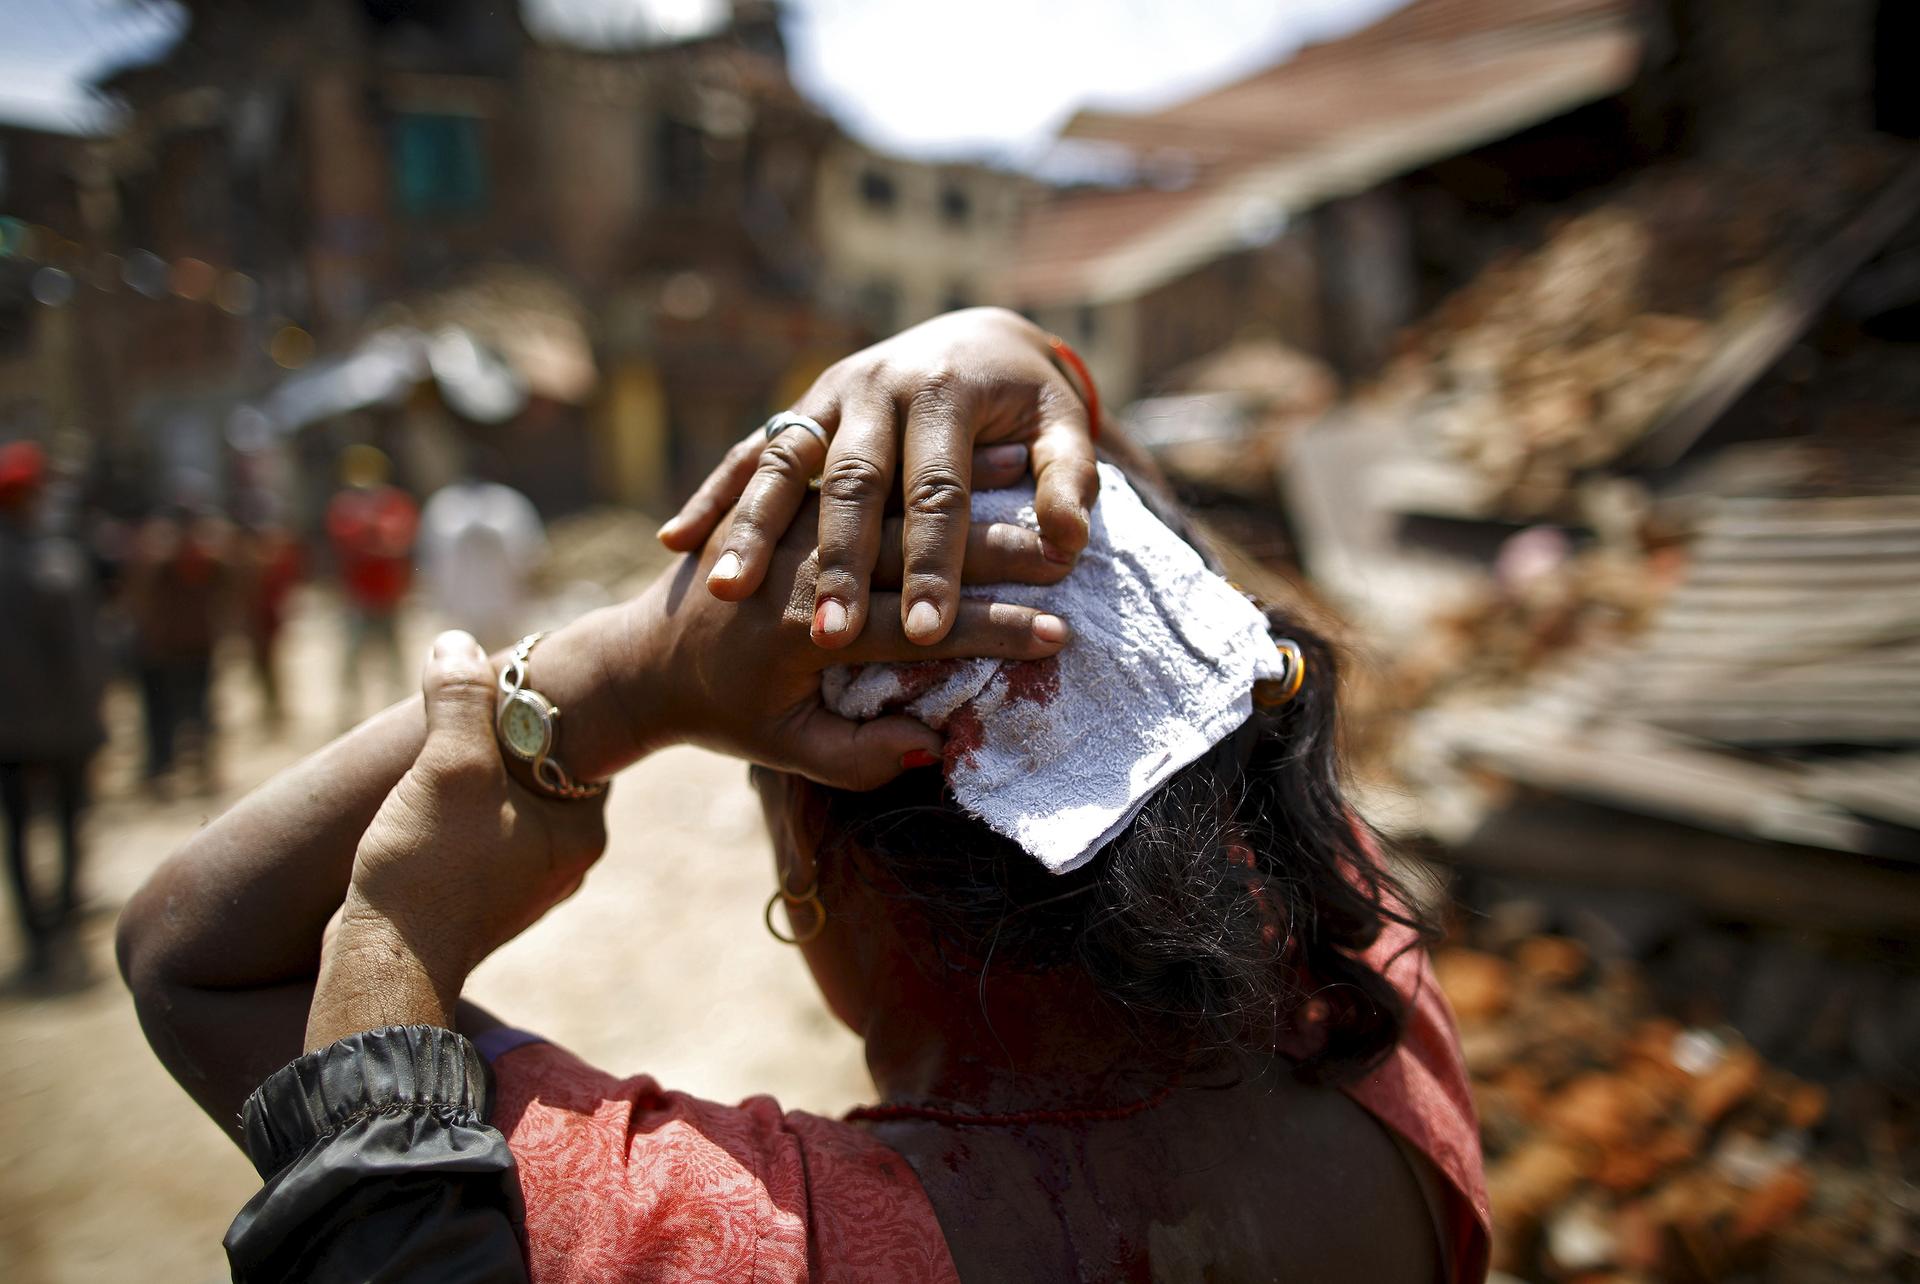 An injured woman walks toward a hospital soon after an earthquake struck Sankhu, Nepal, on May 12, 2015. The 7.3-magnitude quake killed more than two dozen people in Nepal and neighboring states.